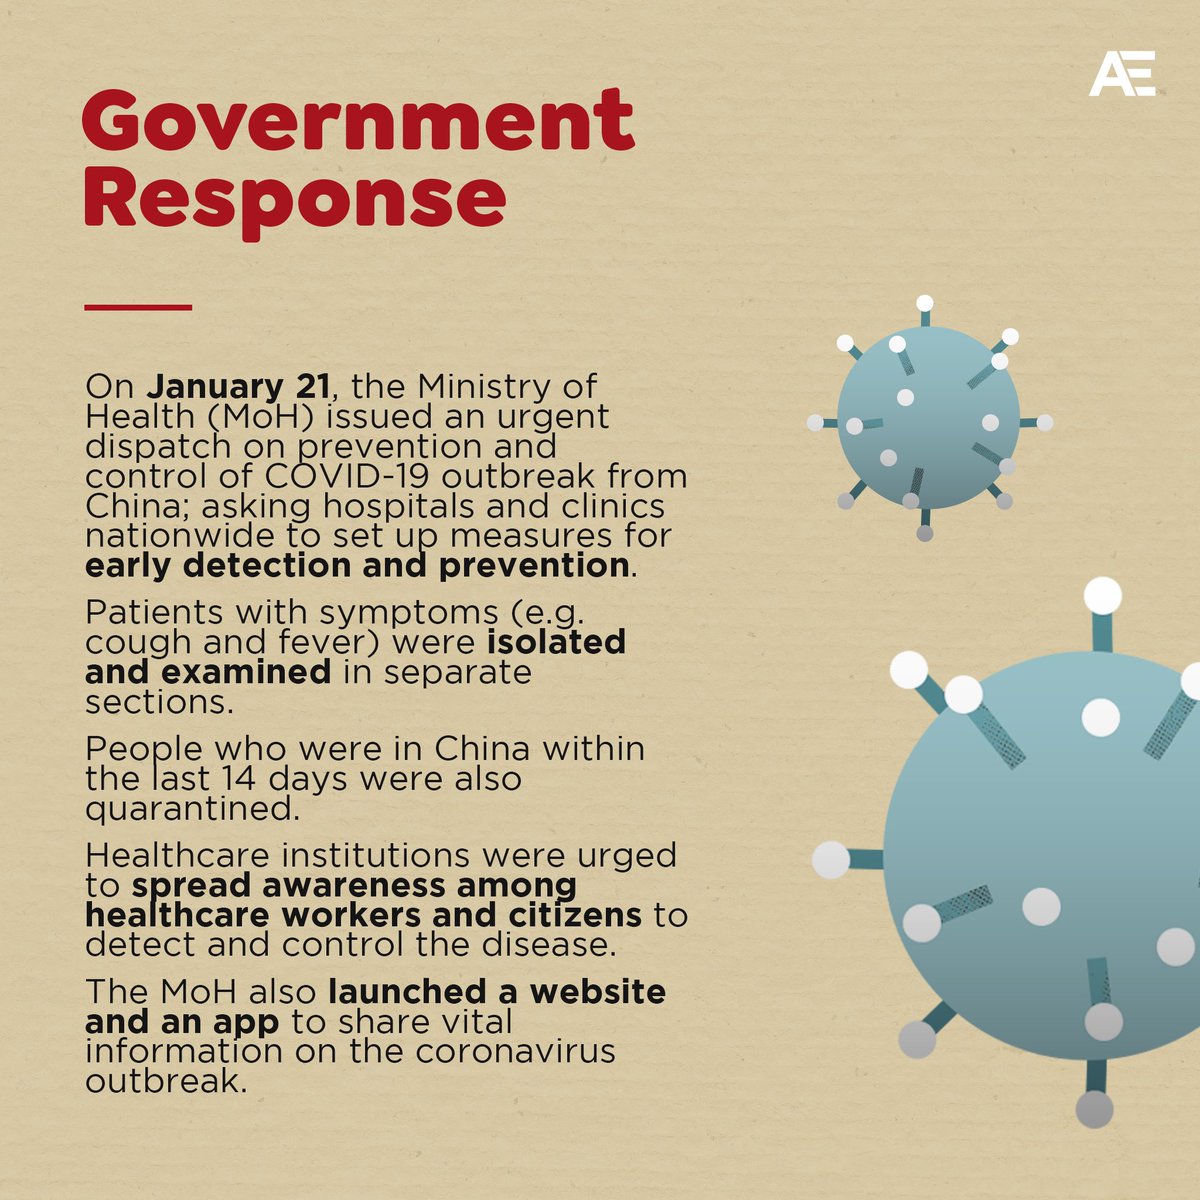 How did the Vietnam government respond to  #COVID19? They RECOGNIZED the threat. They acted immediately. Quarantine measures were implemented right away, especially for people who had travel history to China.The model country certainly did not downplay the virus.